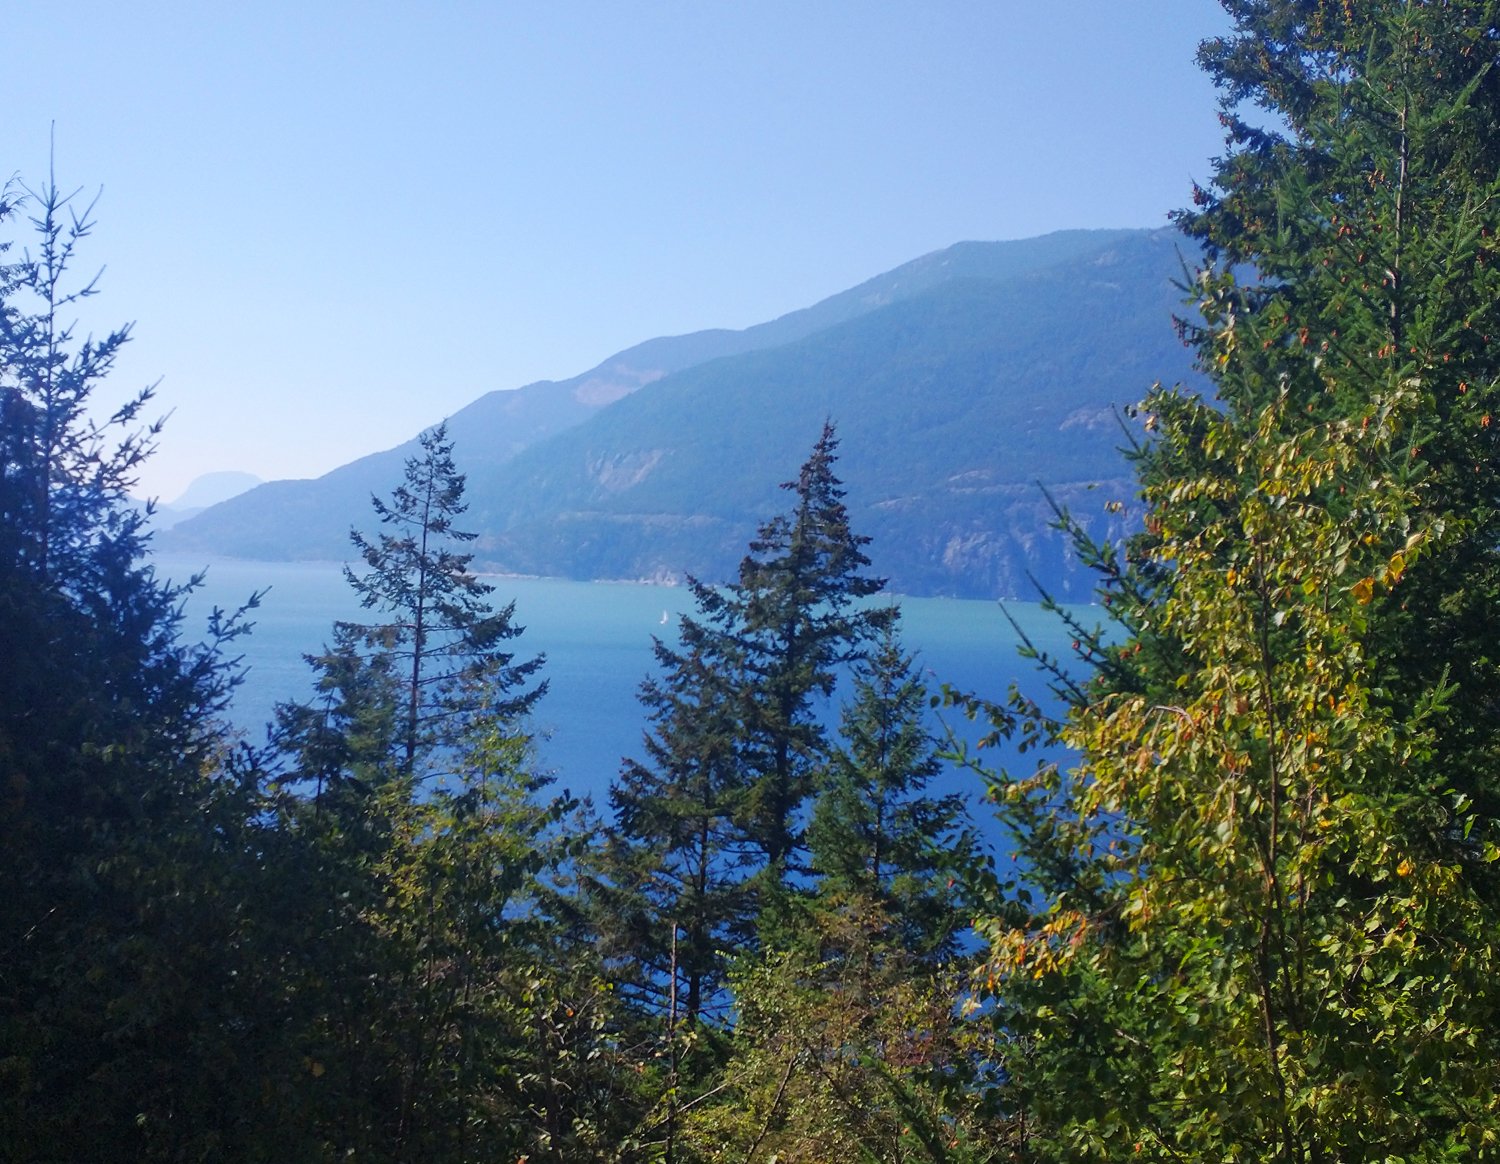 View of the "Sea to Sky" highway that connects Squamish to Vancouver. That's a ride for another day I suppose. Very beautiful.